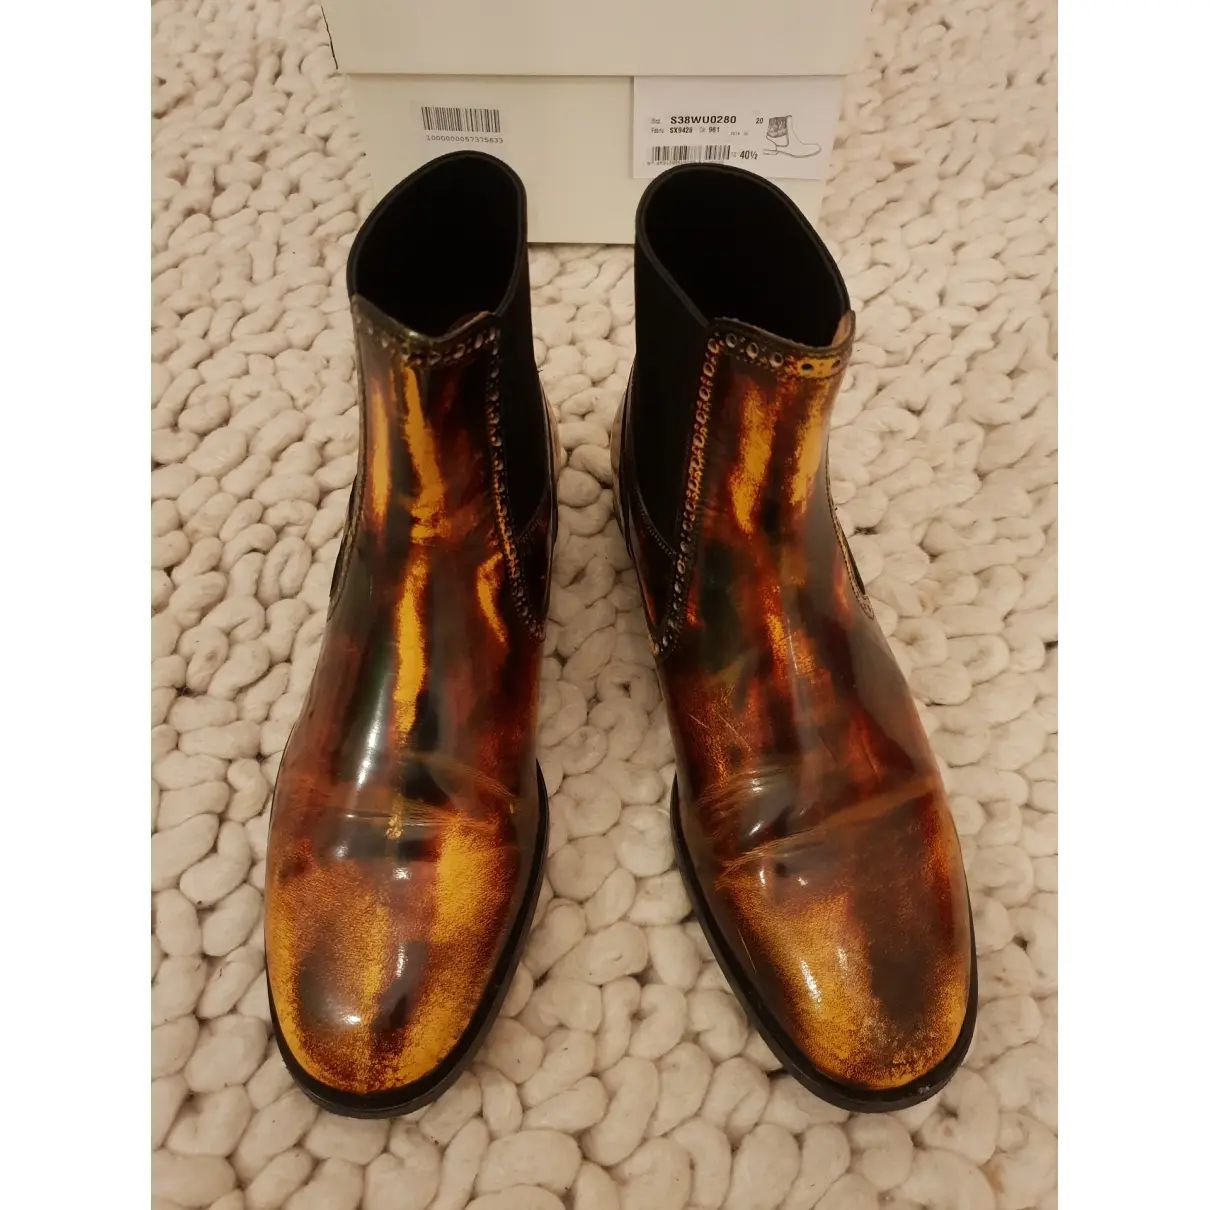 Buy Maison Martin Margiela Patent leather ankle boots online